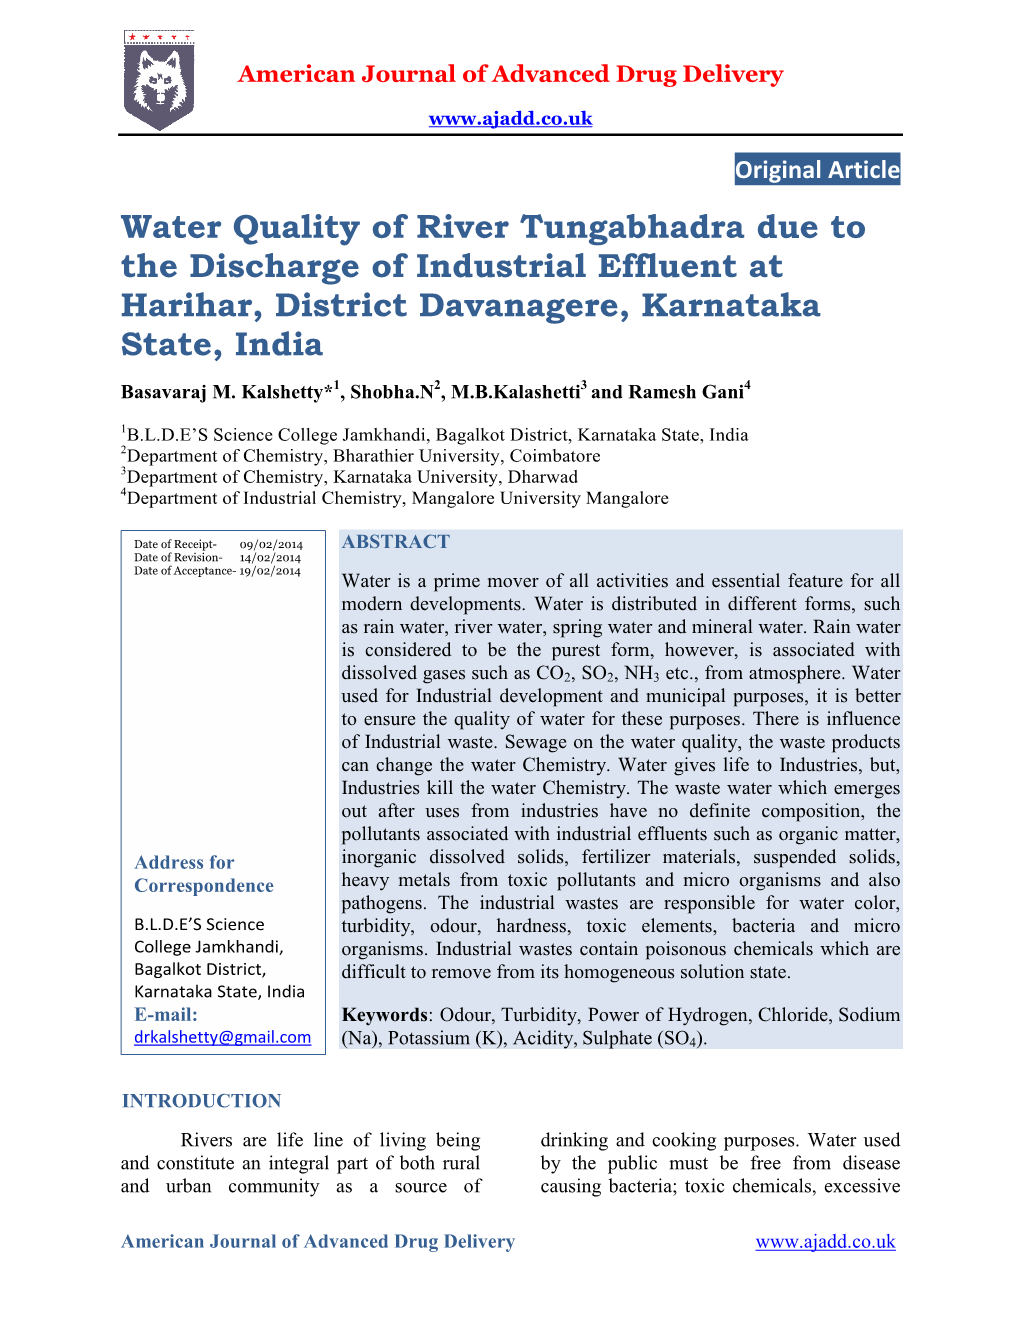 Water Quality of River Tungabhadra Due to the Discharge of Industrial Effluent at Harihar, District Davanagere, Karnataka State, India Basavaraj M